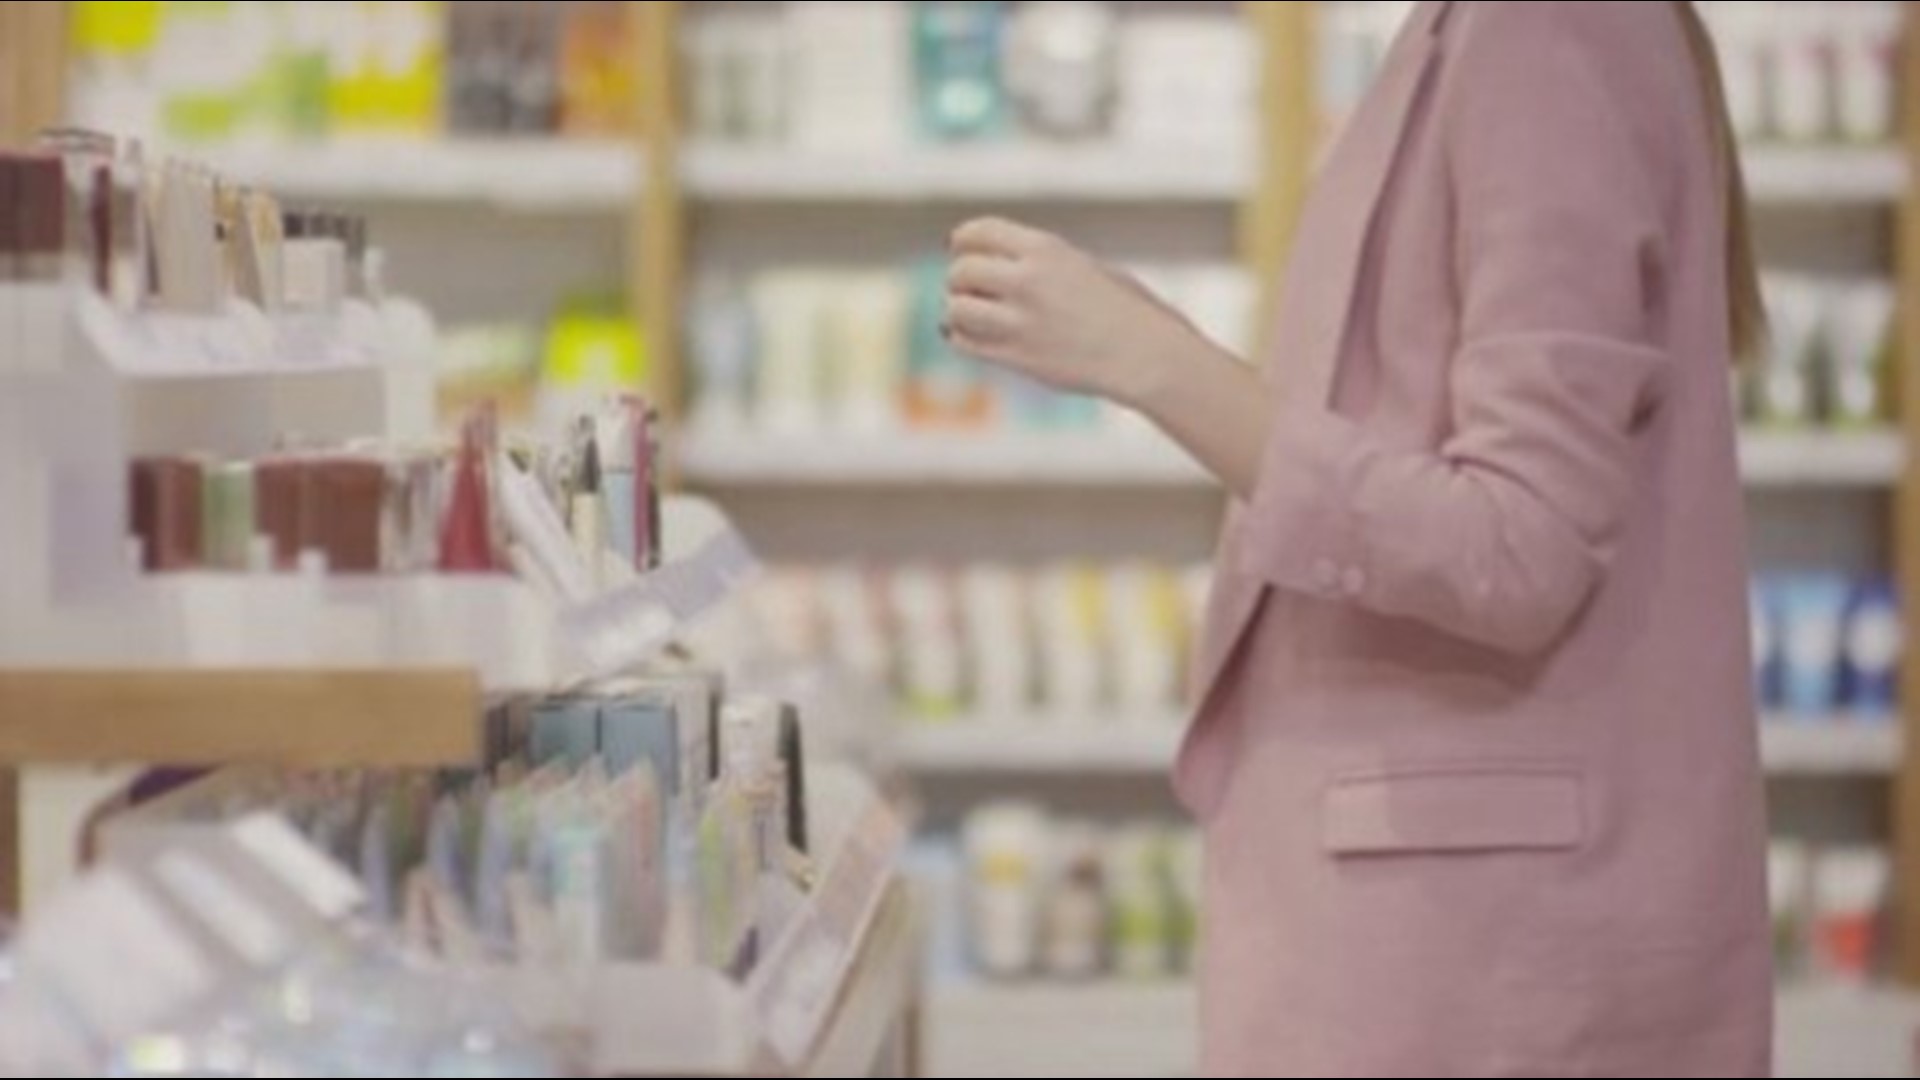 Many beauty companies now offer products without 'toxic' or 'suspicious' chemicals, but some of these 'clean' products have a dirty little secret.